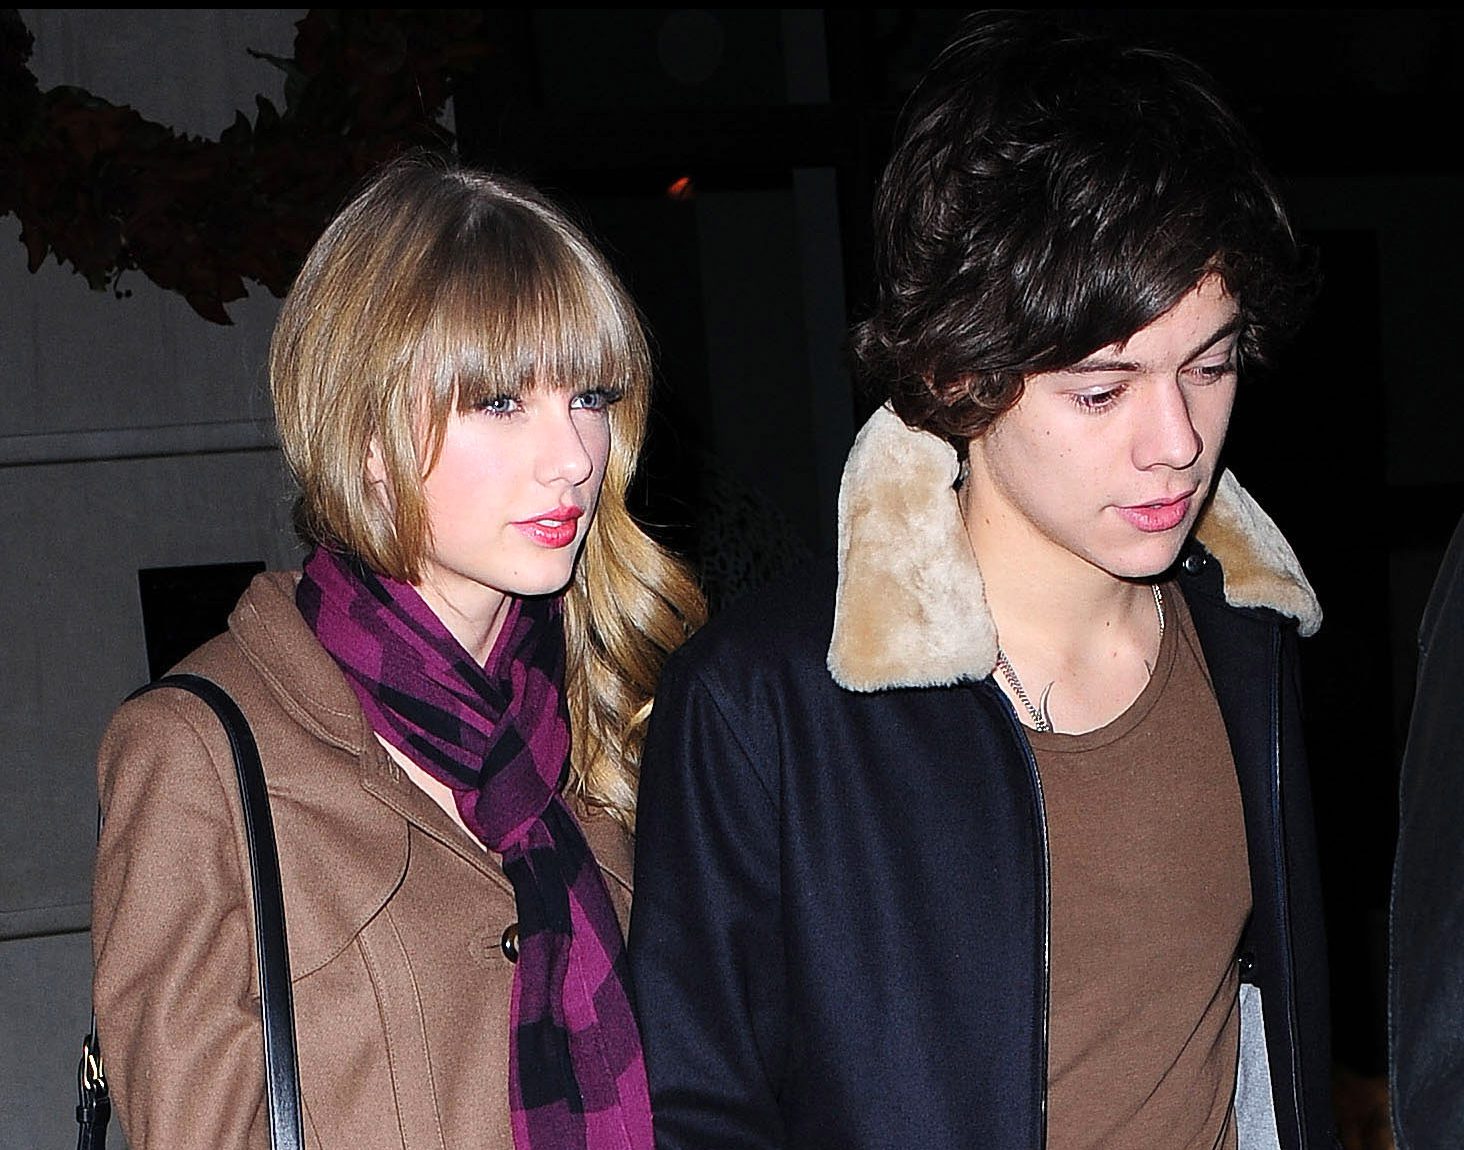  'Haylor' was a short-lived romance